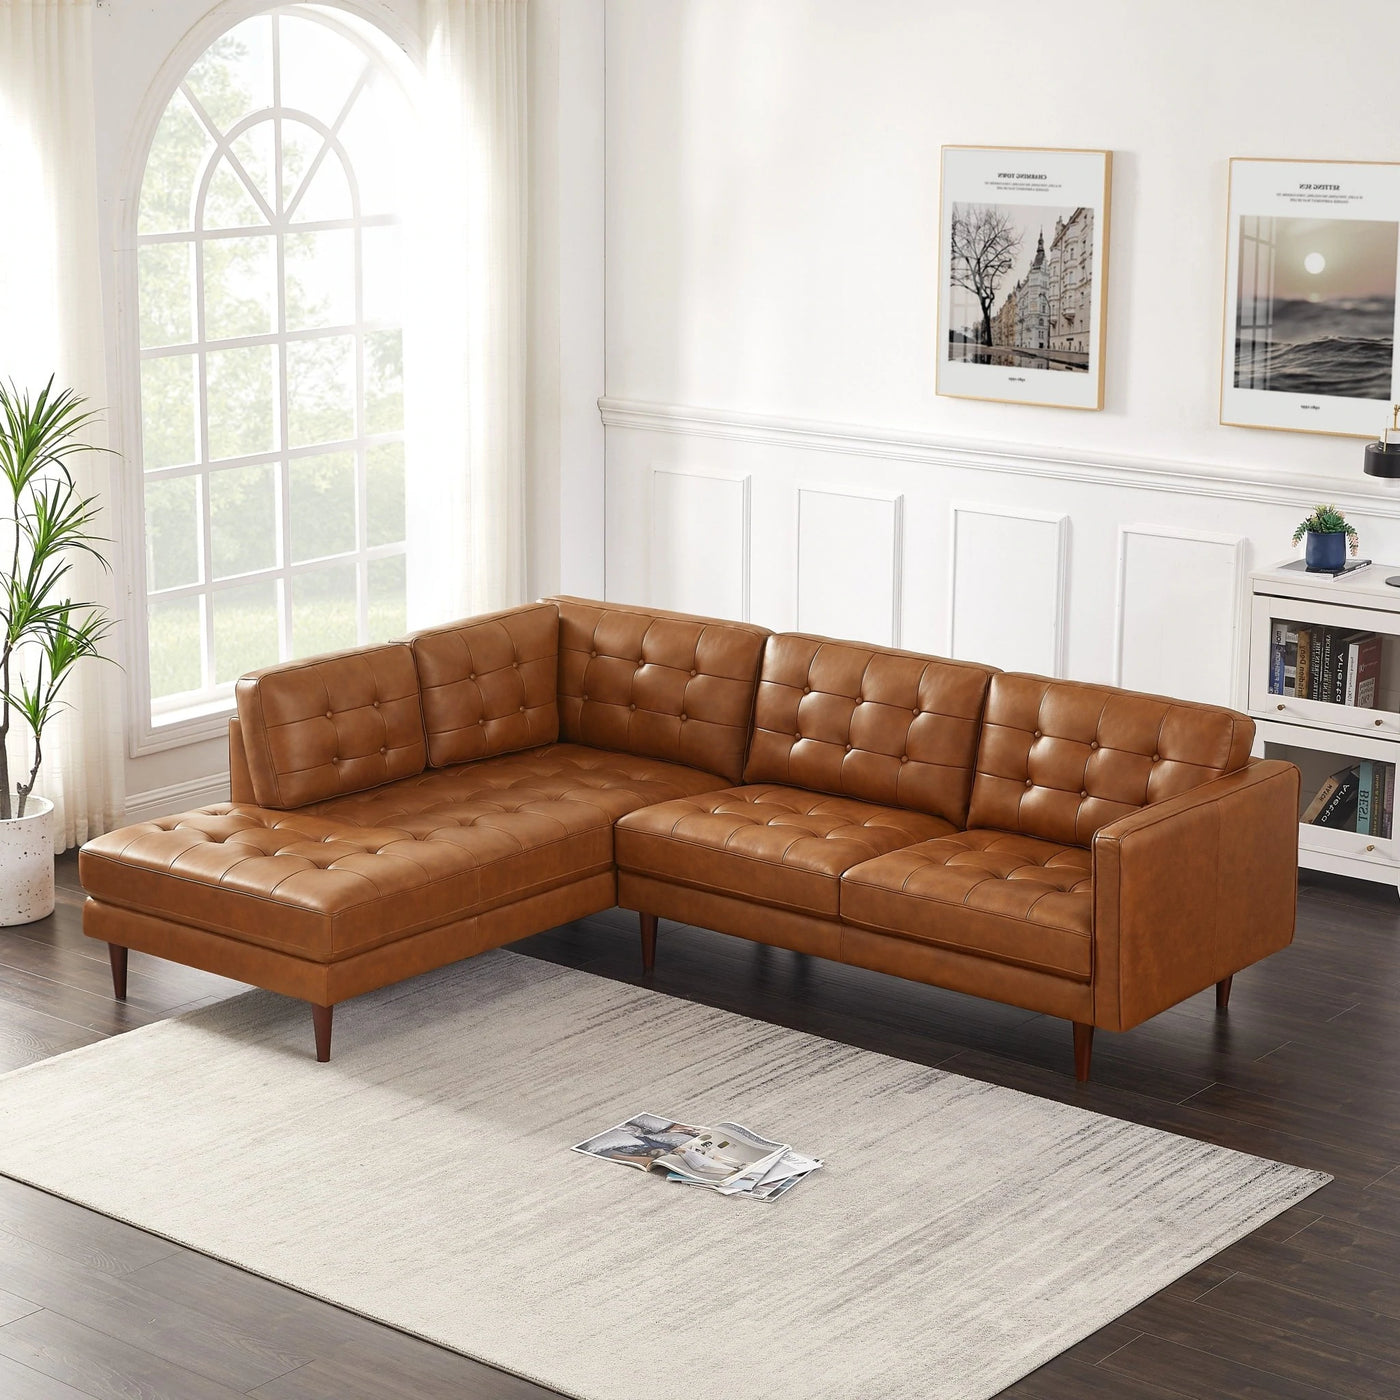 Genuine Italian Leather Modern Brown Tufted Sectional - Left and Right Facing Chaise